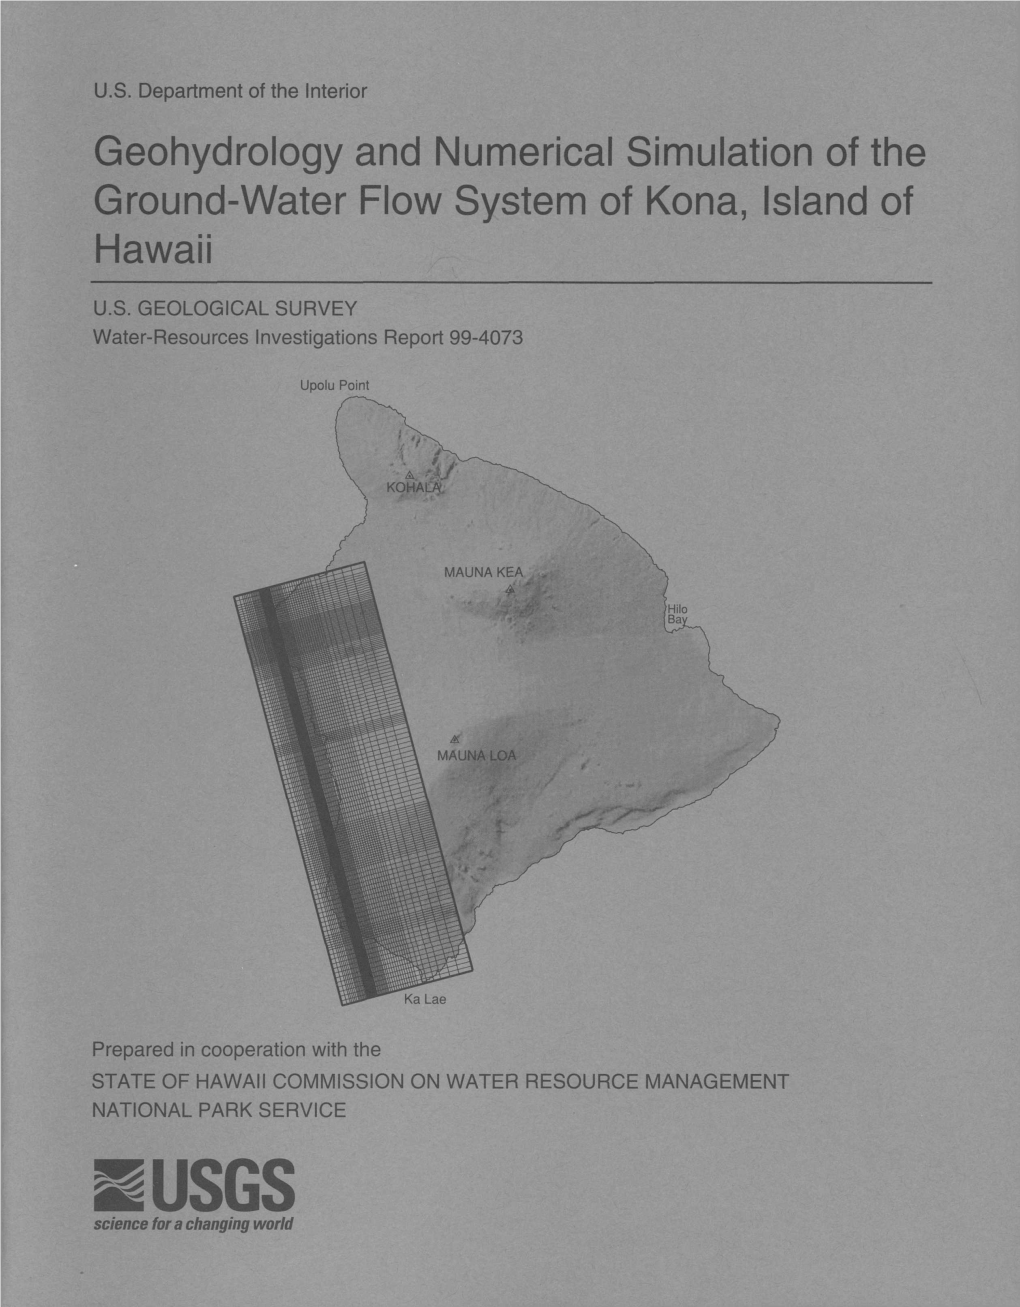 Geohydrology and Numerical Simulation of the Ground-Water Flow System of Kona, Island of Hawaii